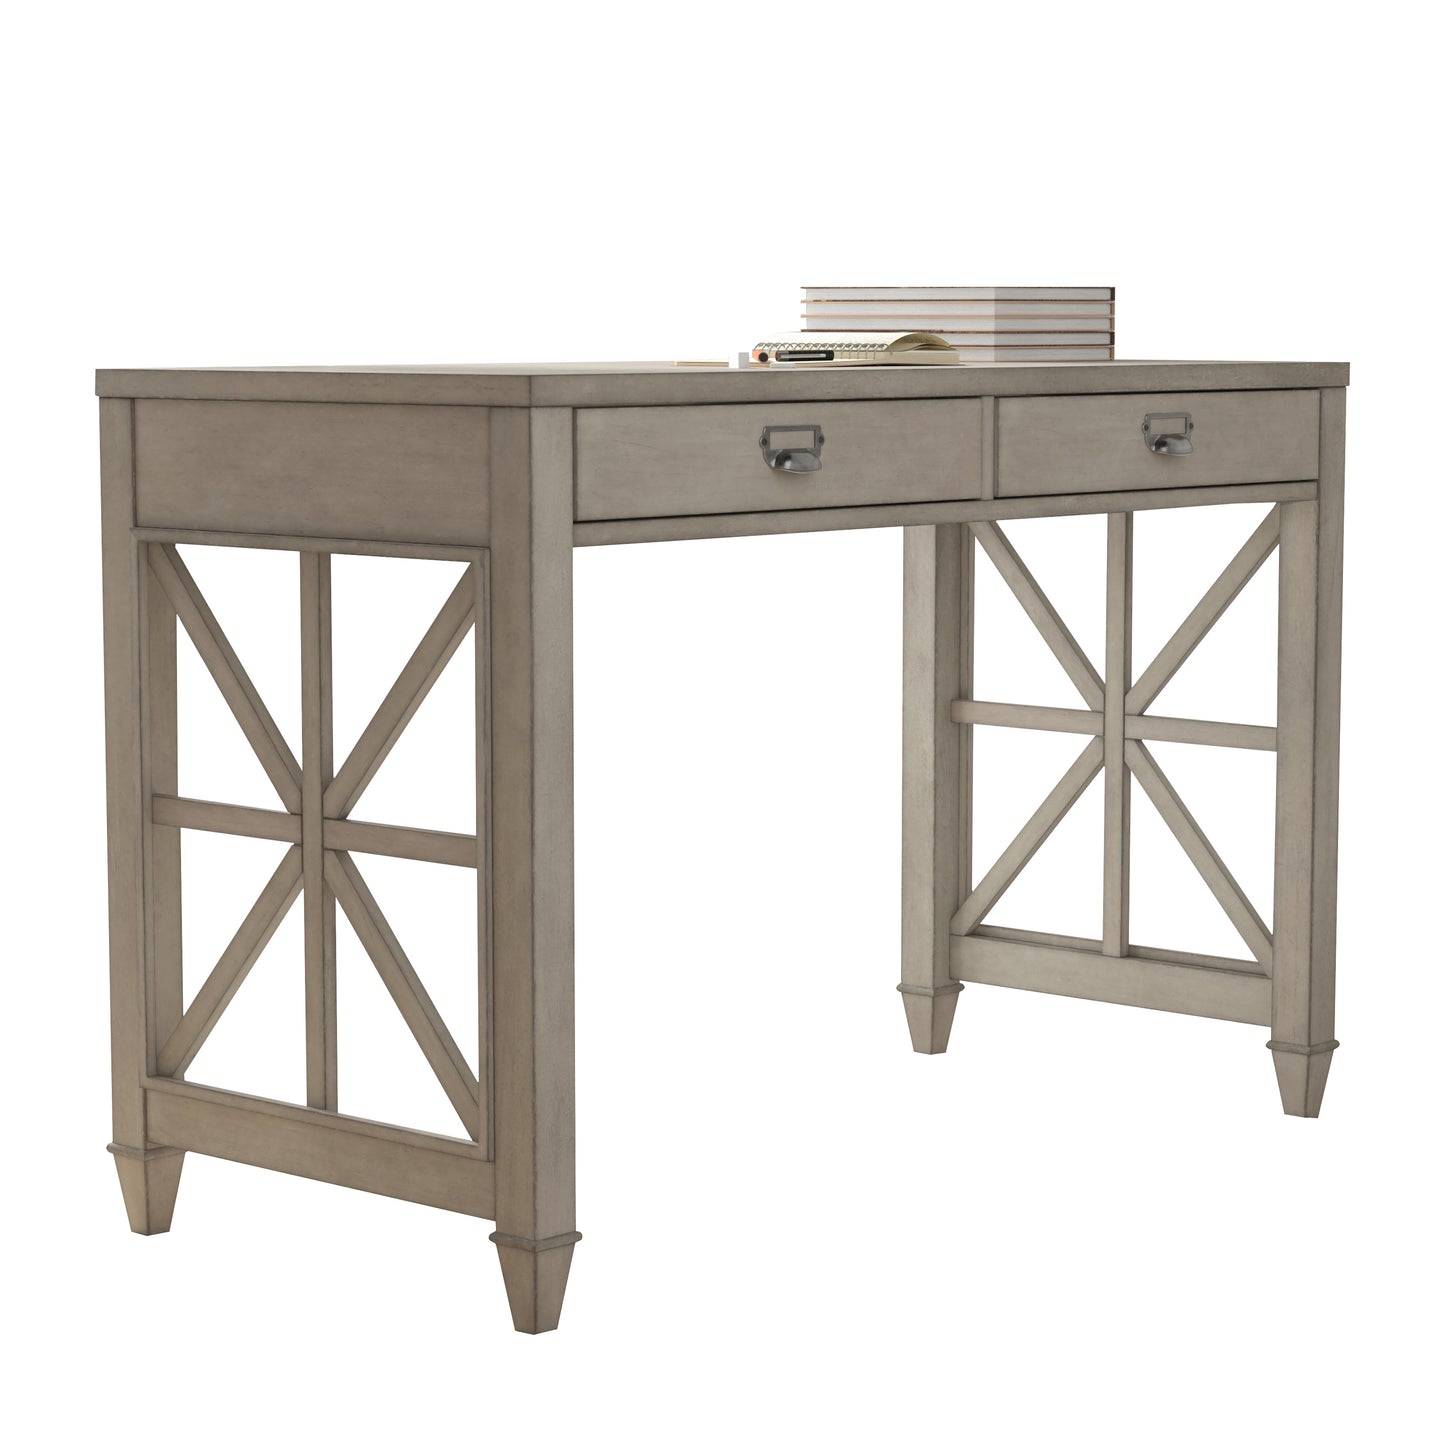 American solid wood square desk dressing table with two drawers,46.06*21.65*30.91H (Antique Gray)